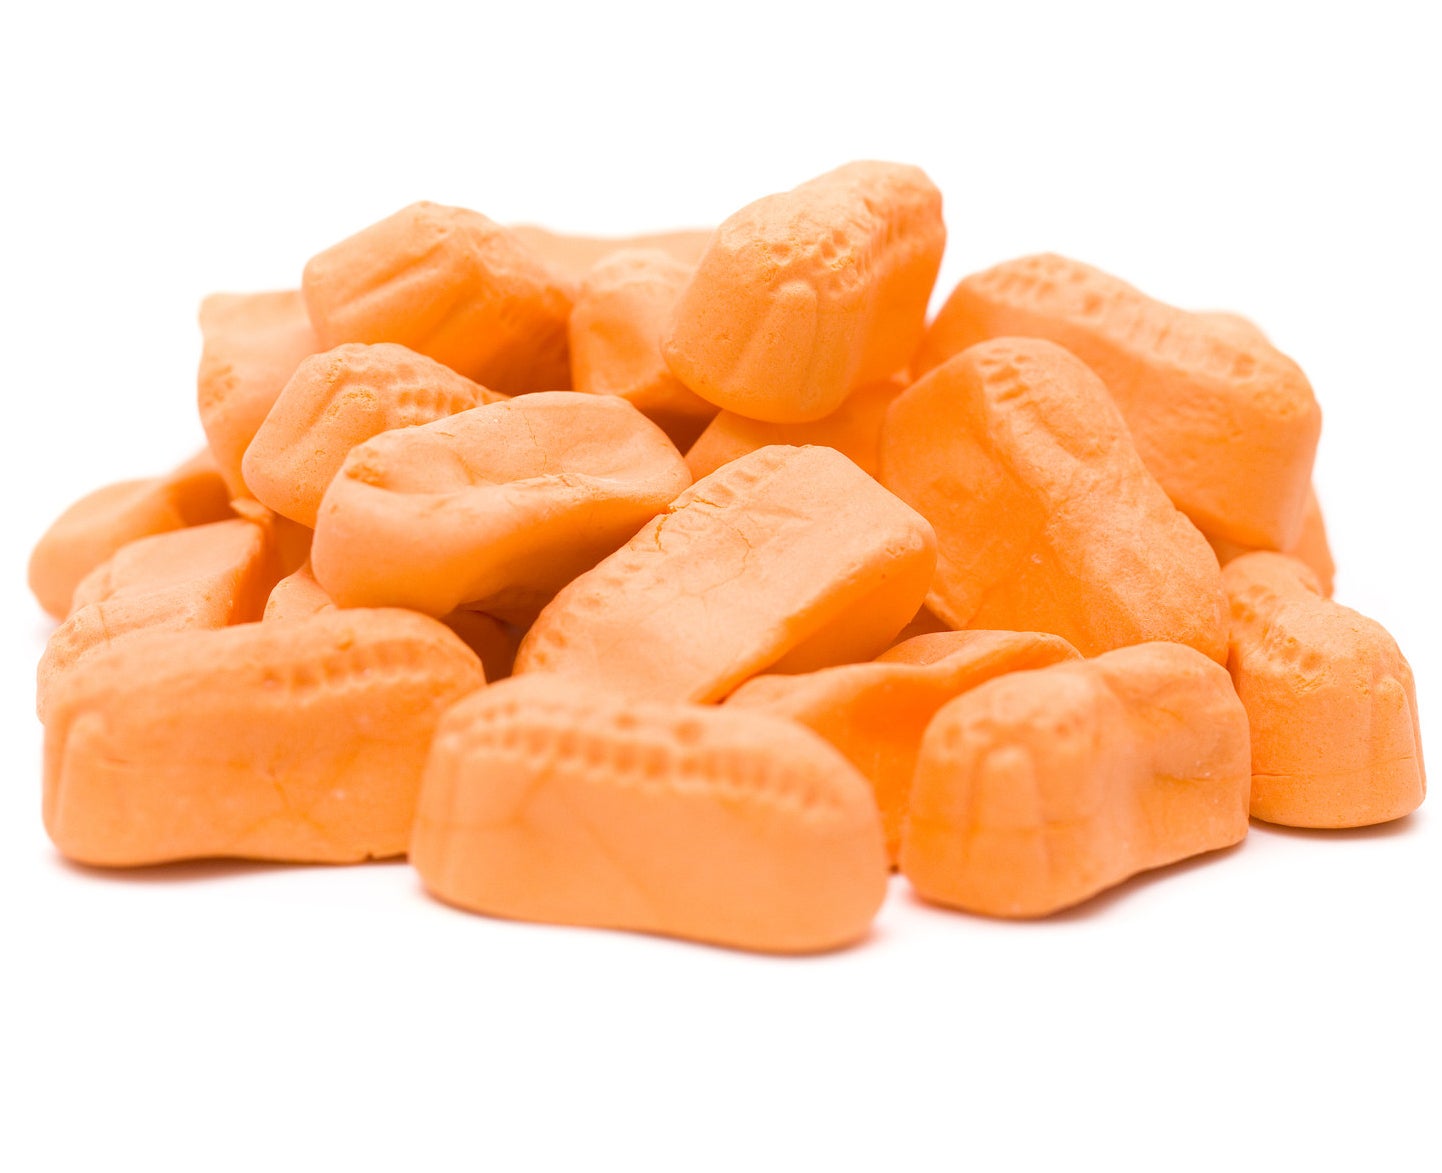 Orange candy peanuts on a white background.